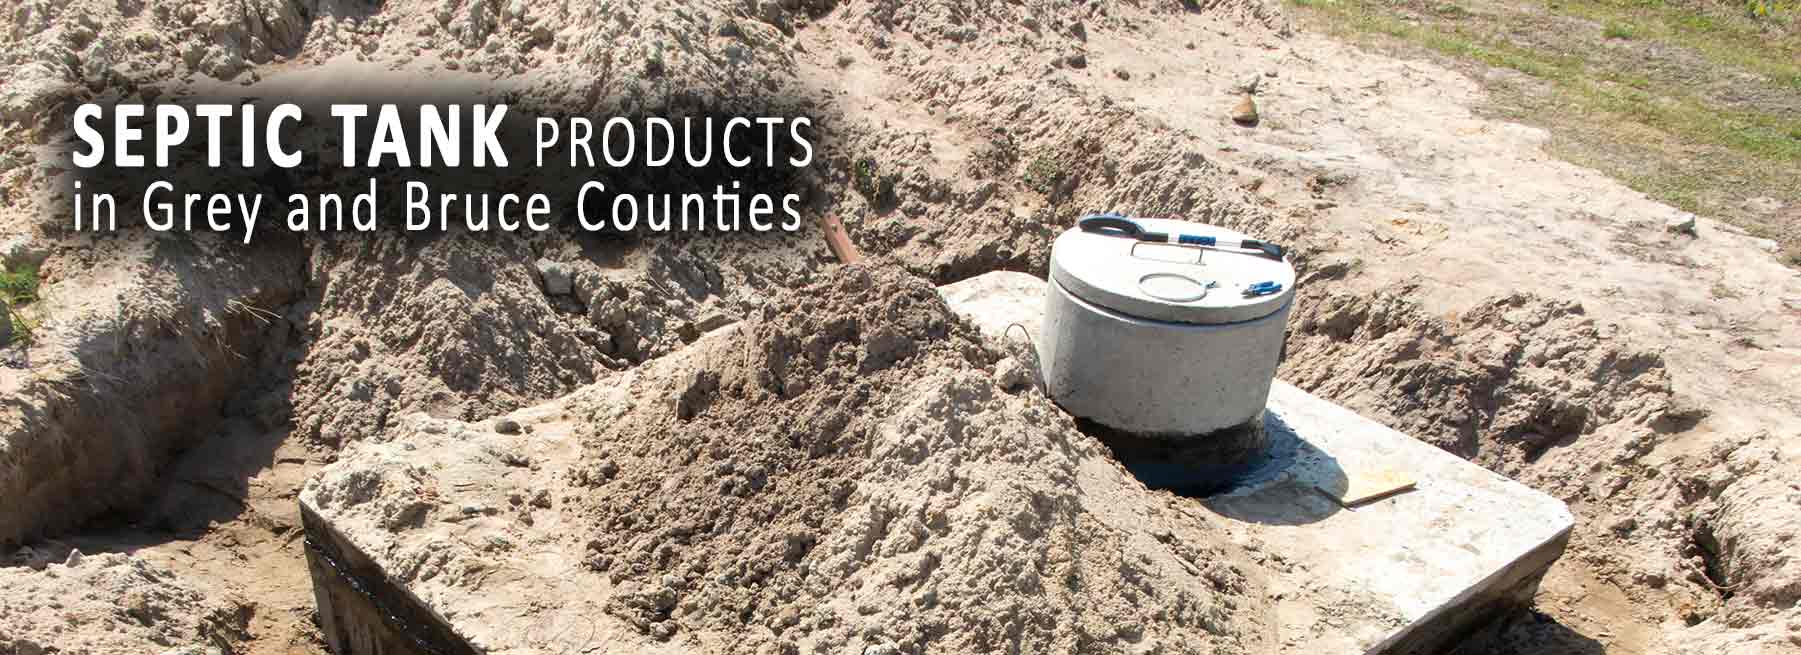 Septic Tank Products in Grey and Bruce Counties